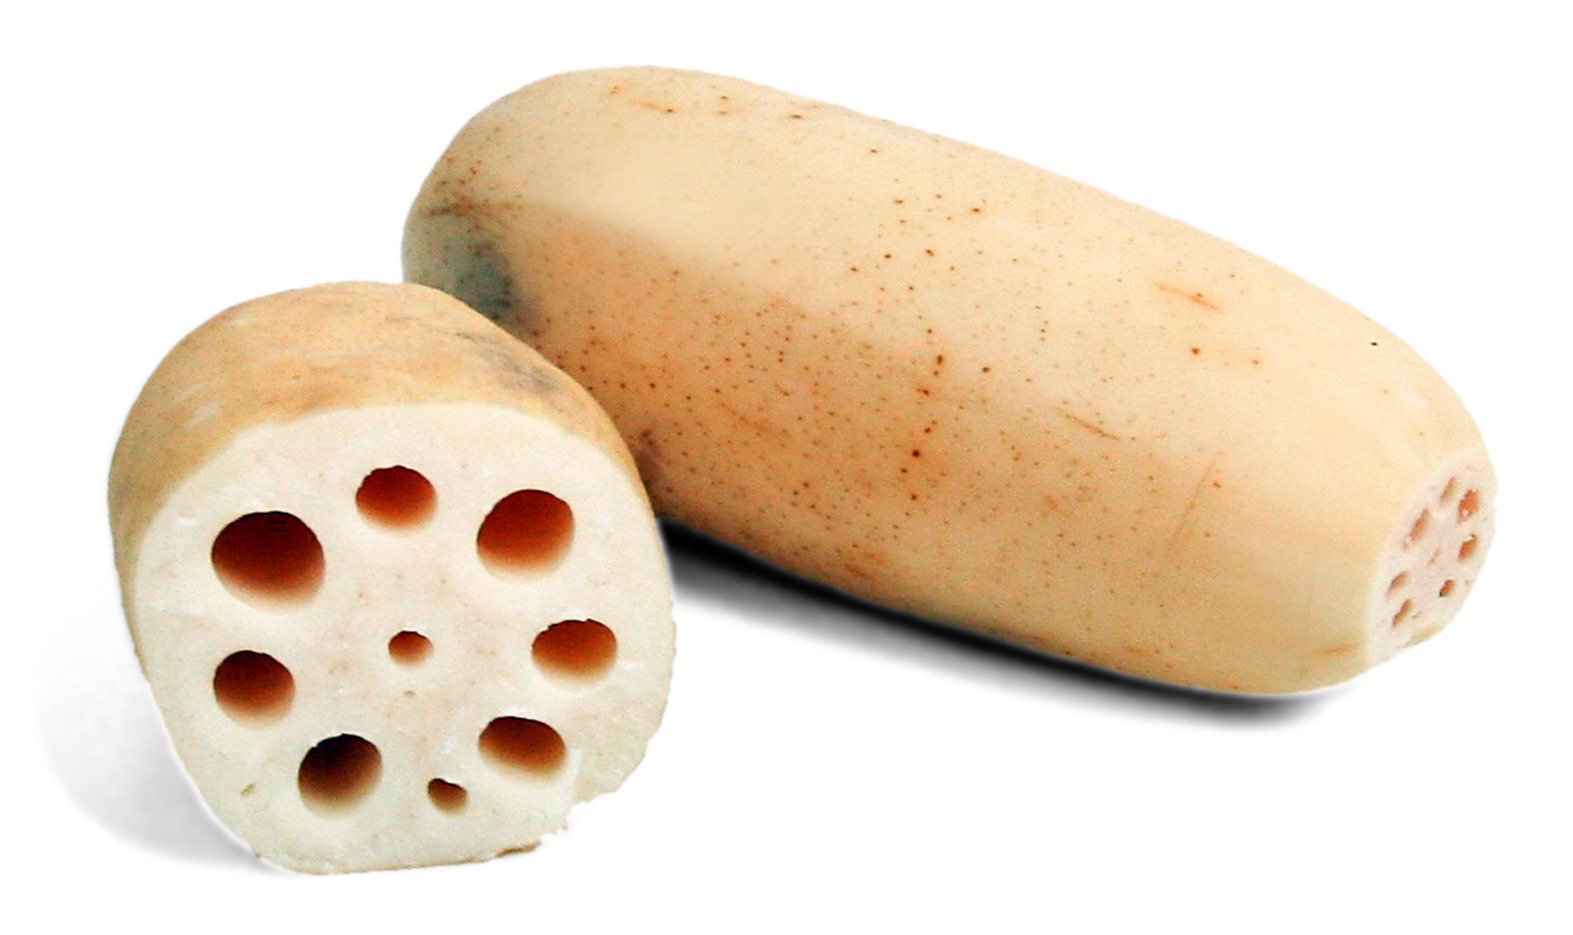 Types Of Root Vegetables With Pictures: Lotus Root